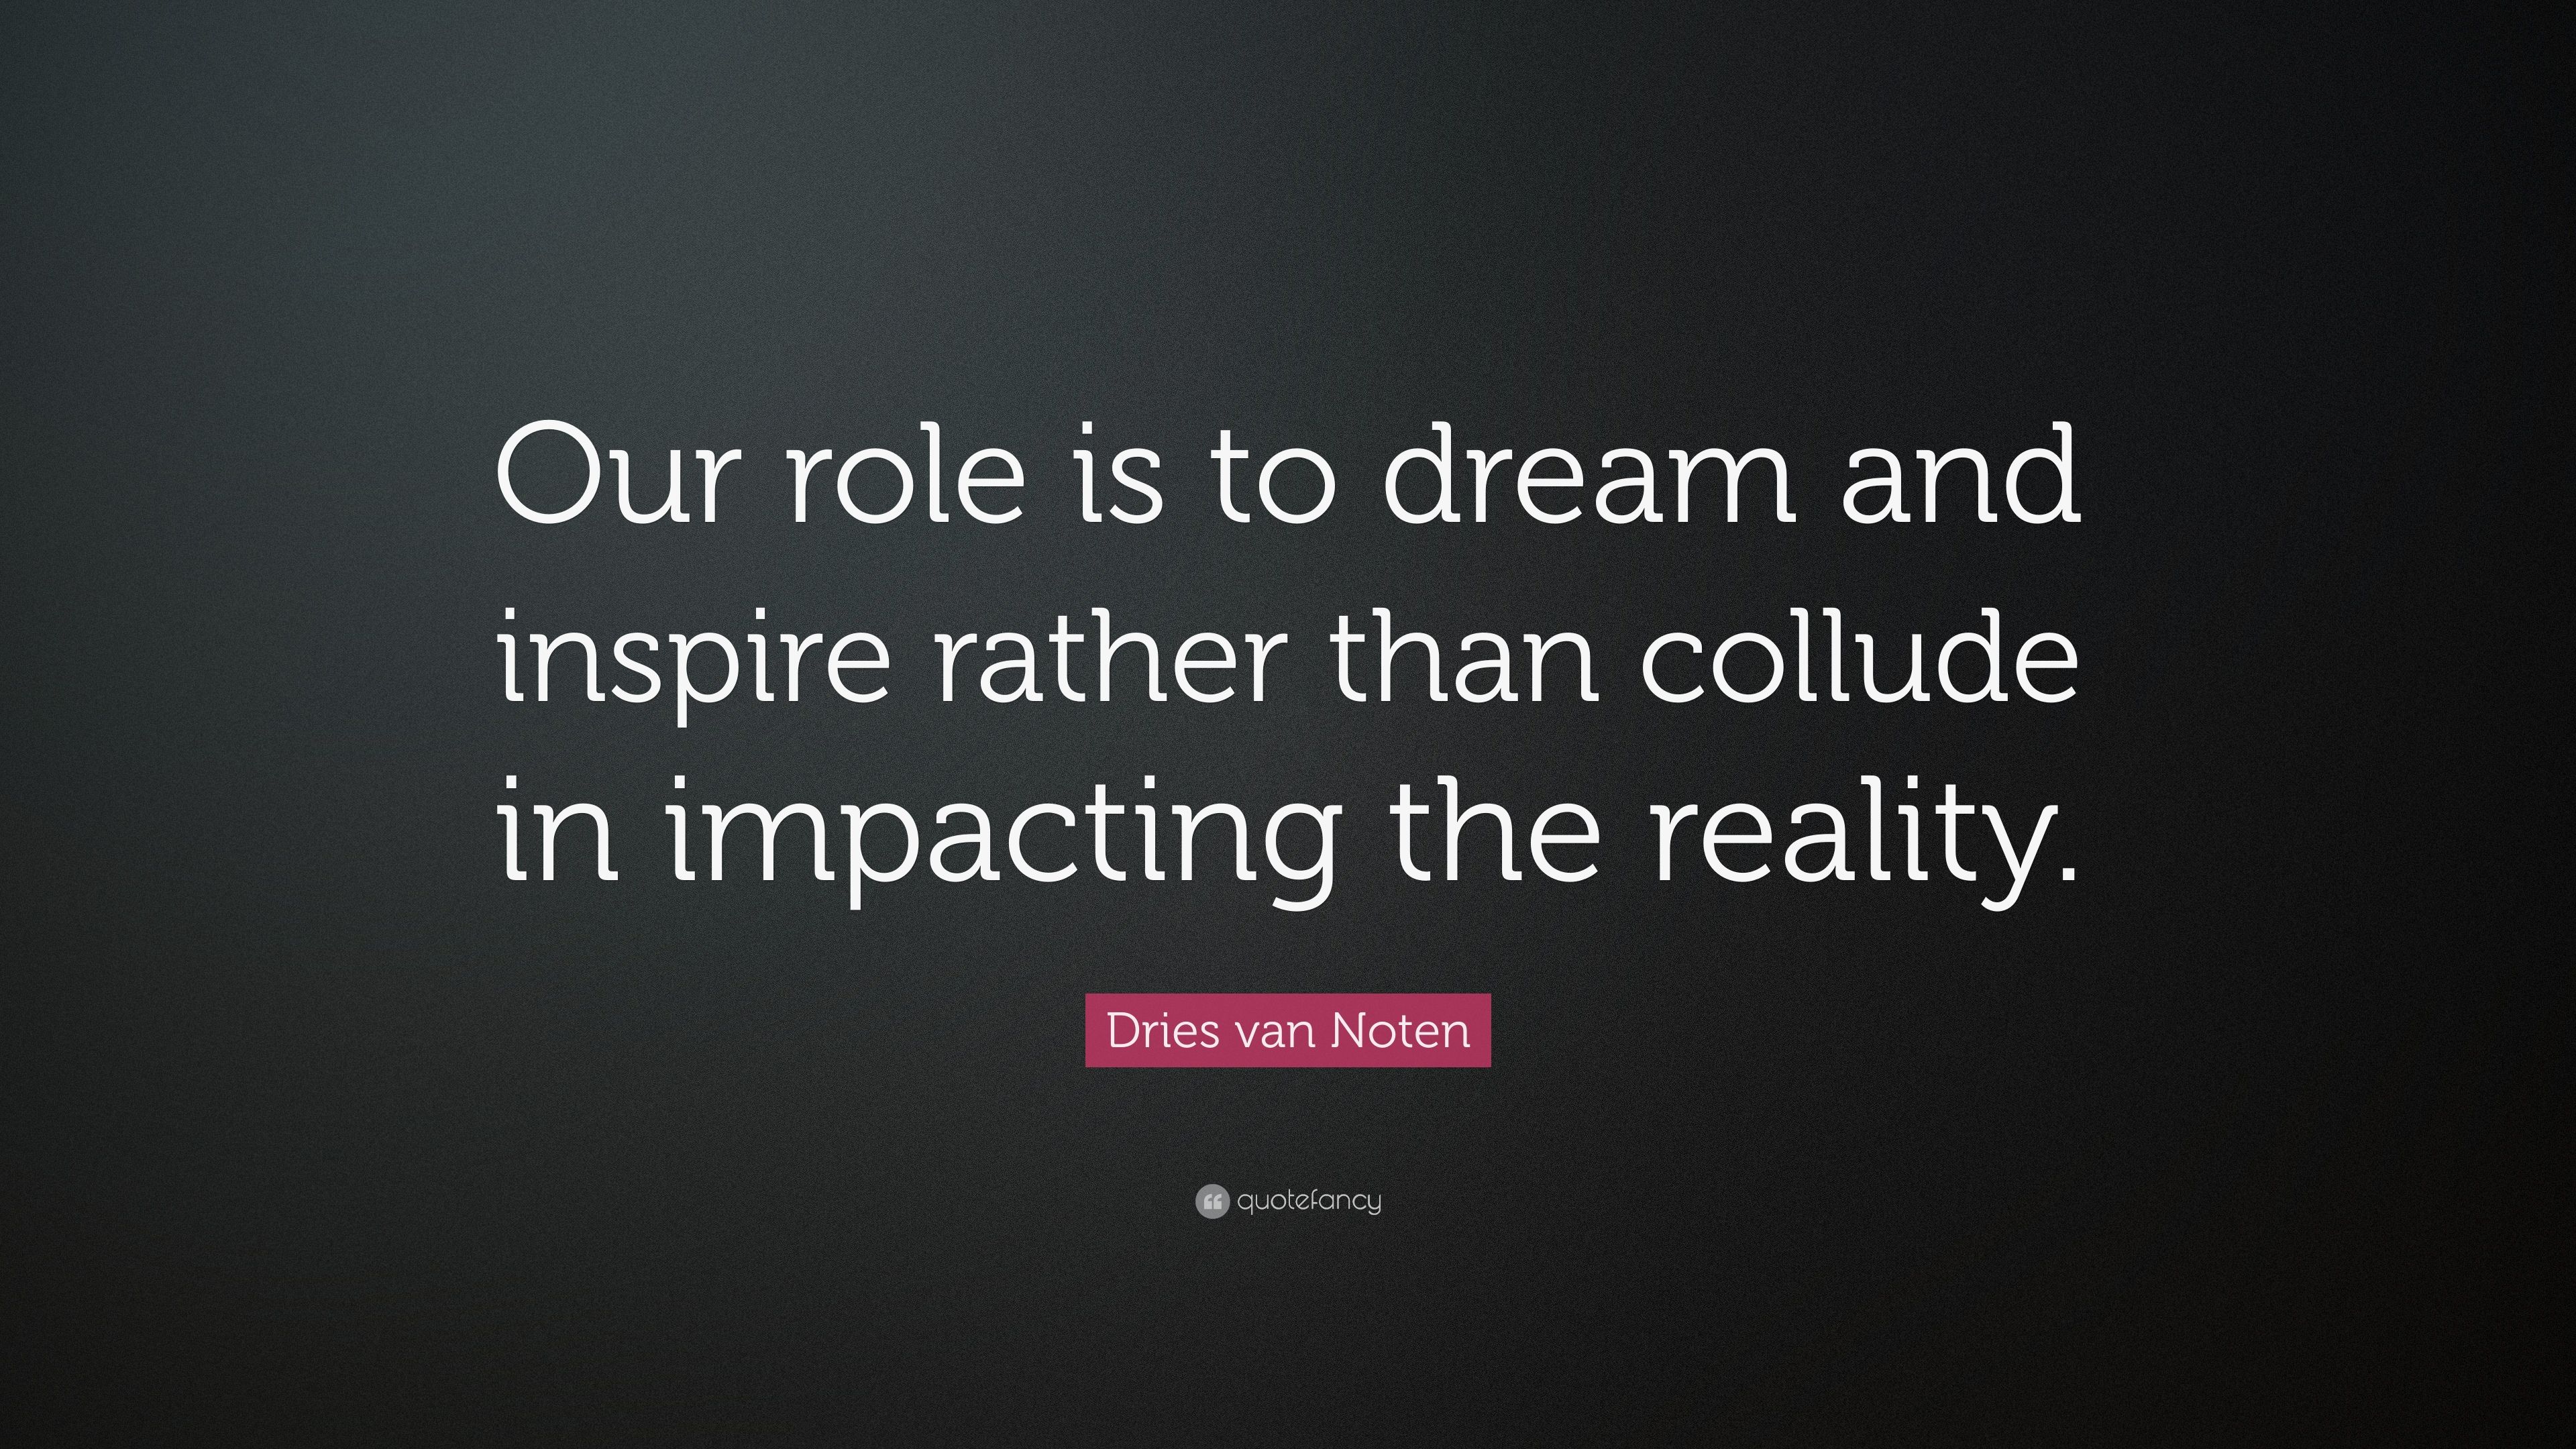 Dries van Noten Quote: “Our role is to dream and inspire rather than